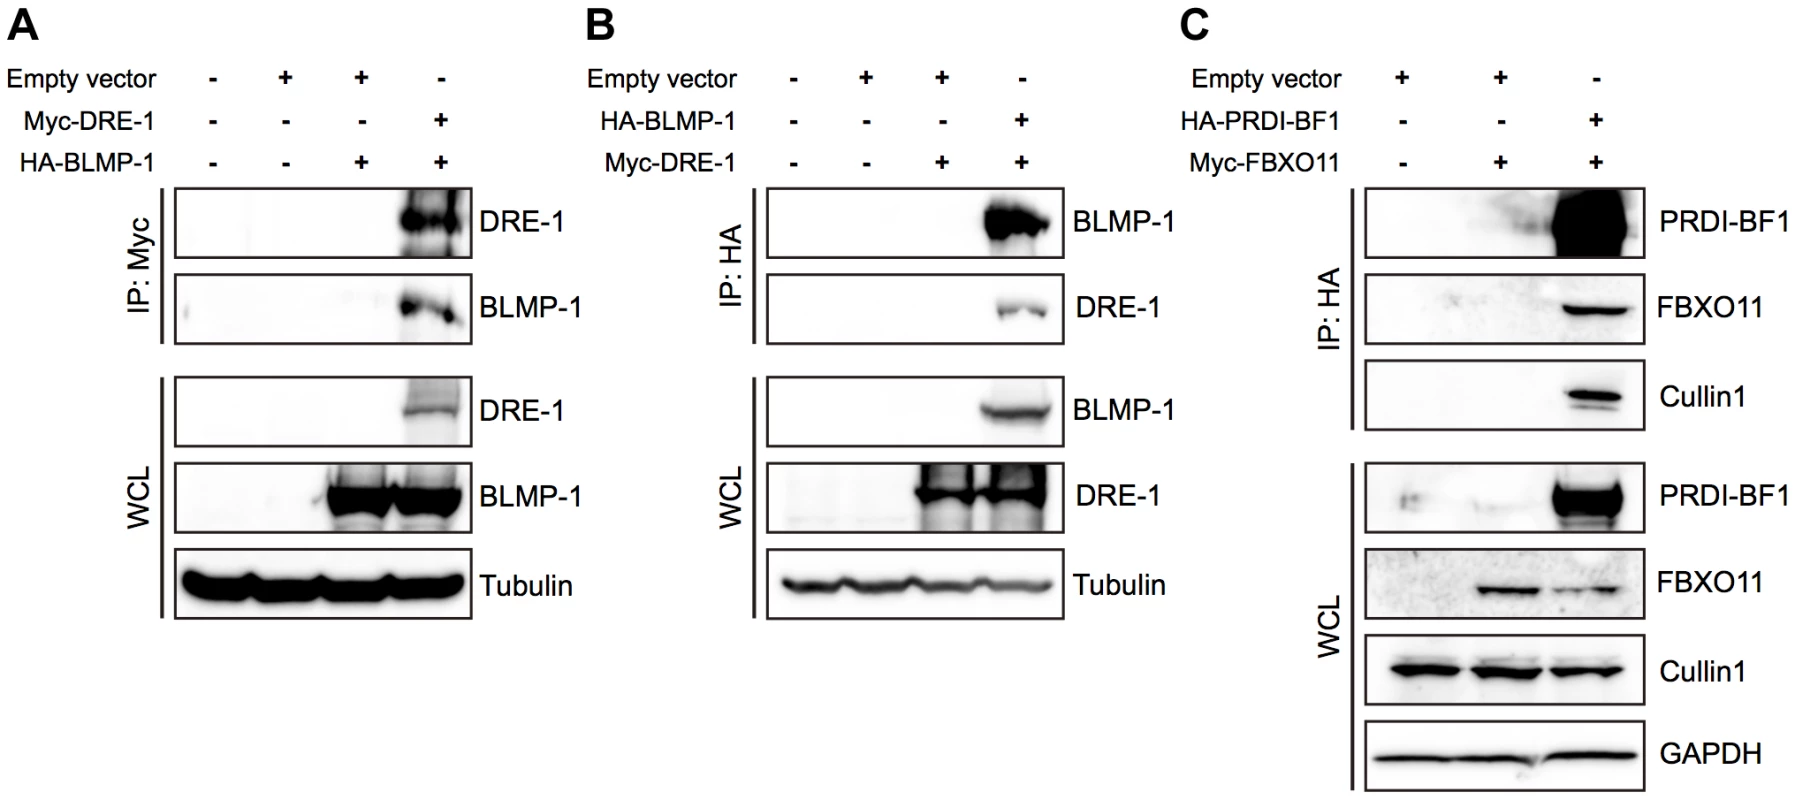 BLMP-1 and DRE-1 are co-immunoprecipitated in human cell cultures, as are their human orthologs PRDI-BF1 and FBXO11.